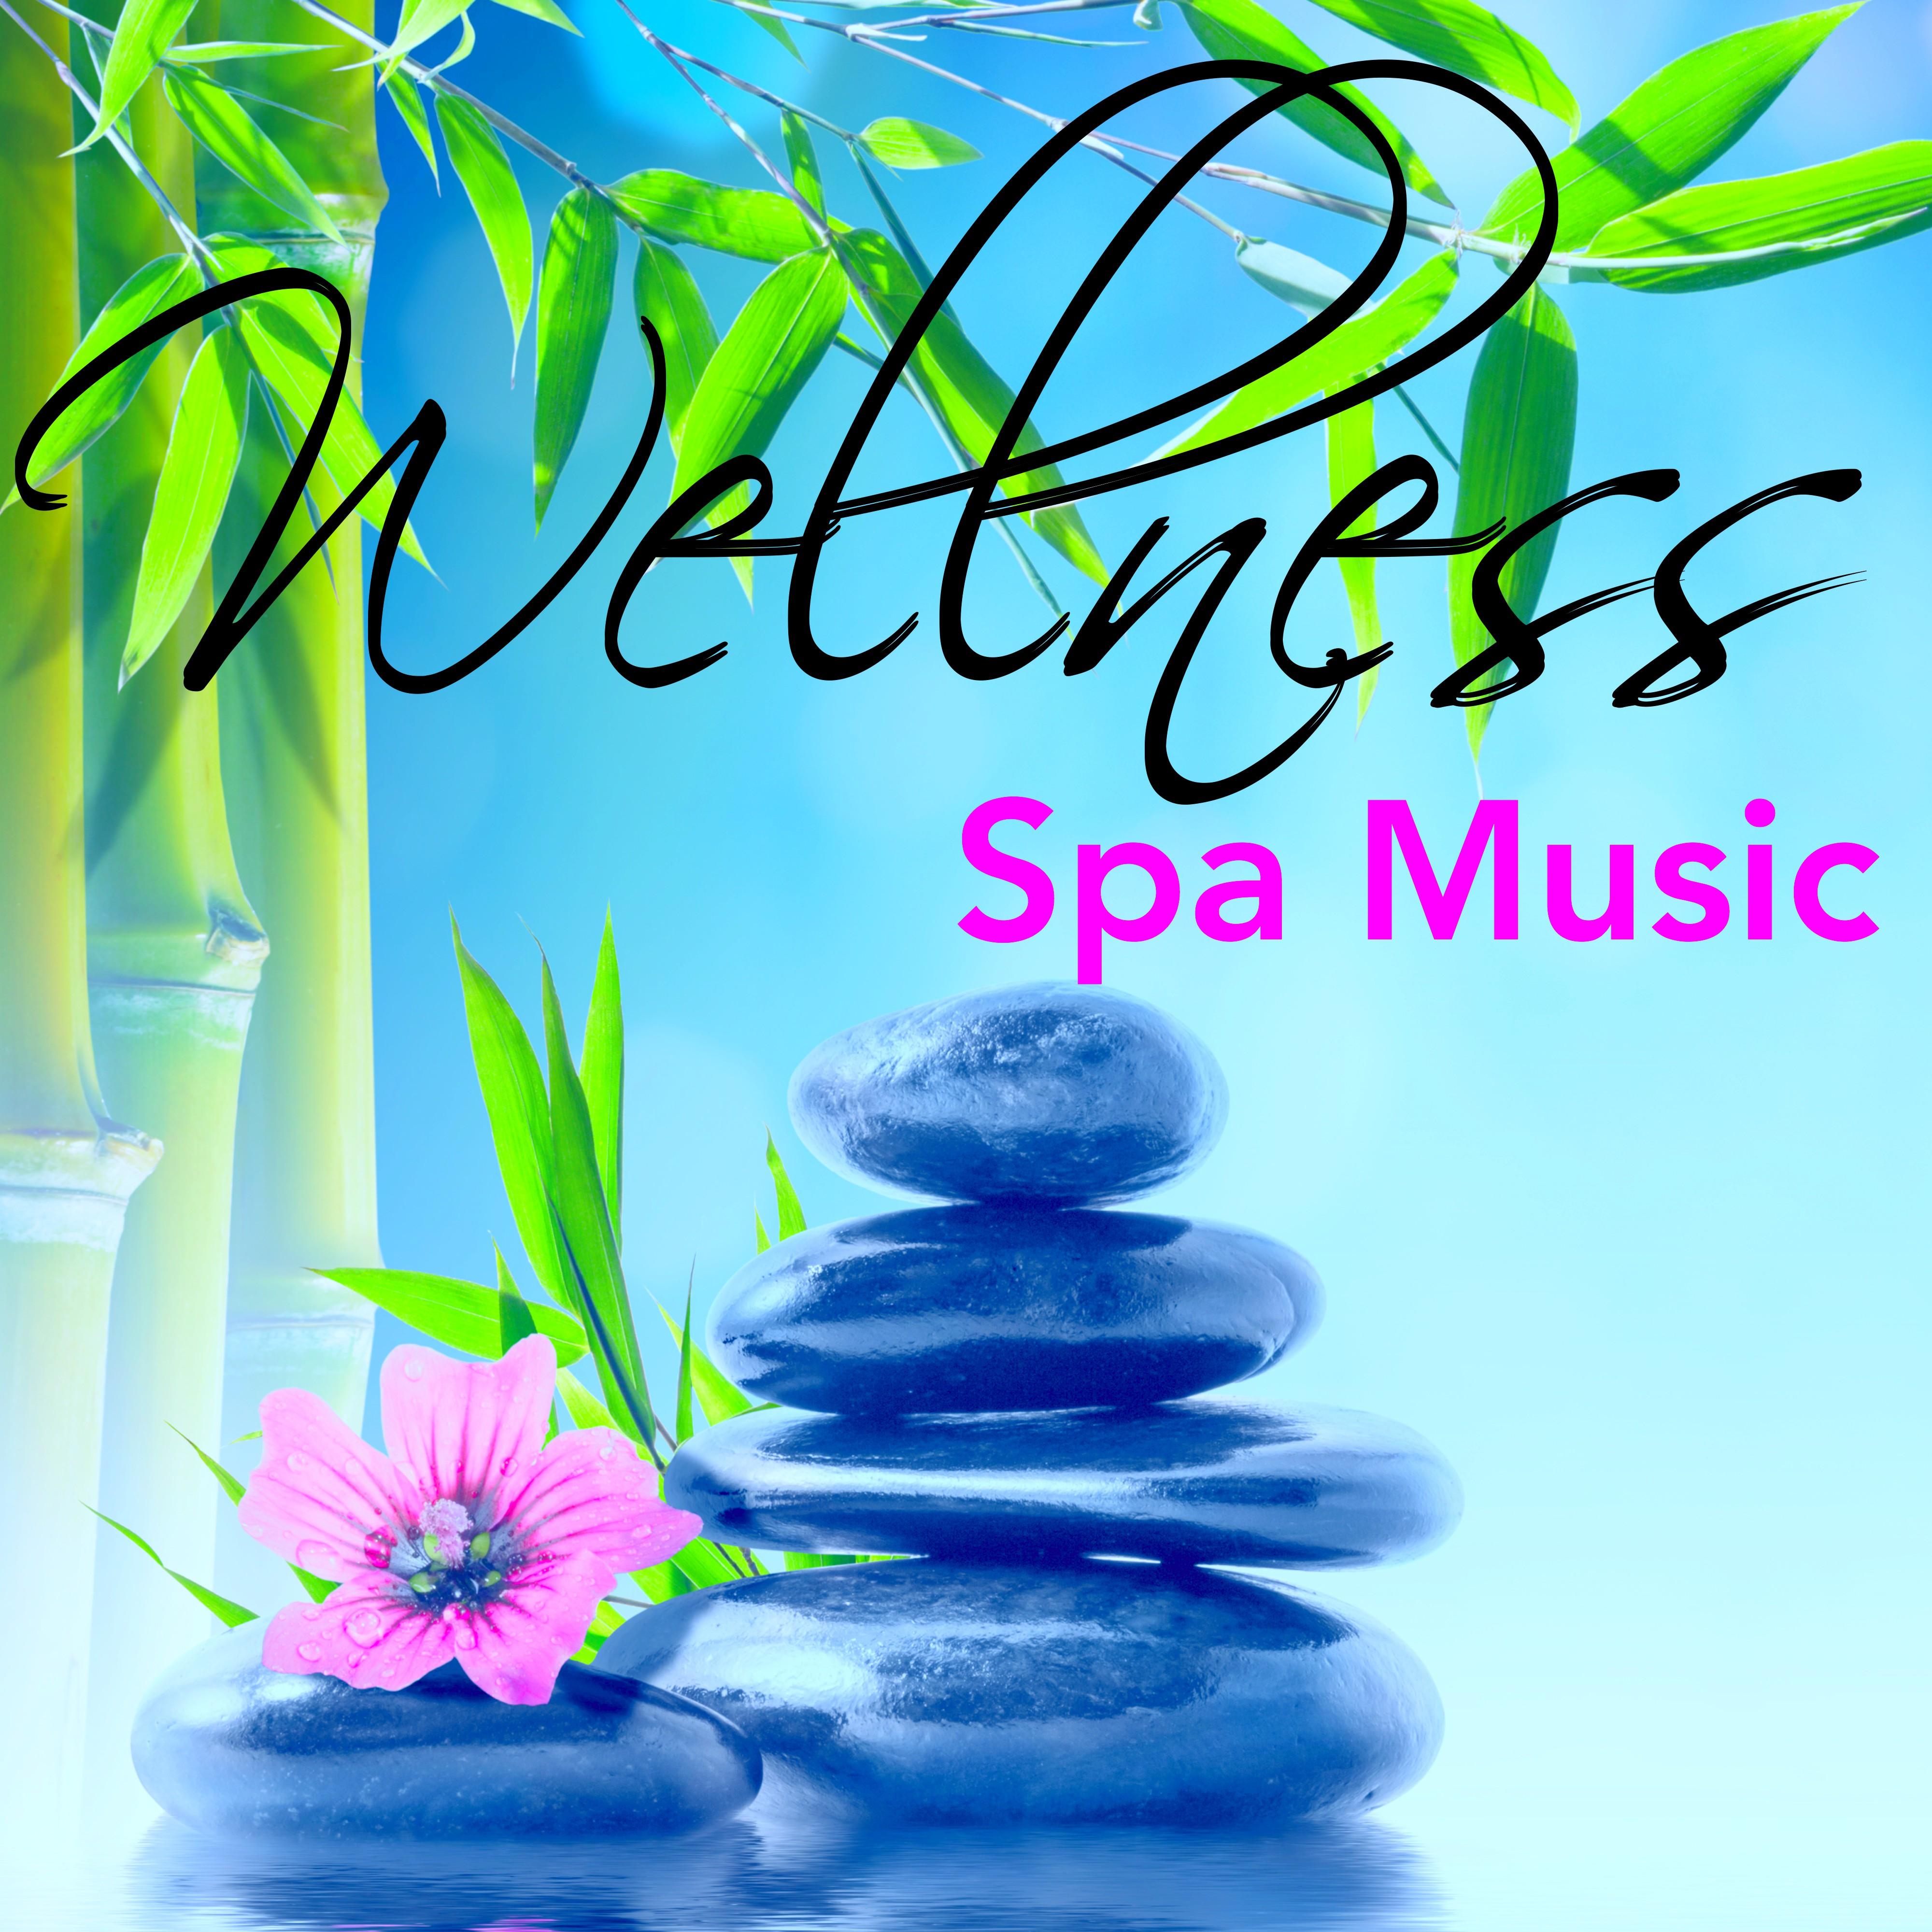 Wellness Spa Music - Jazz Chill Out Sounds to Relaxation, Massage & Yoga Meditation, Soothing Smooth Music for Chillax